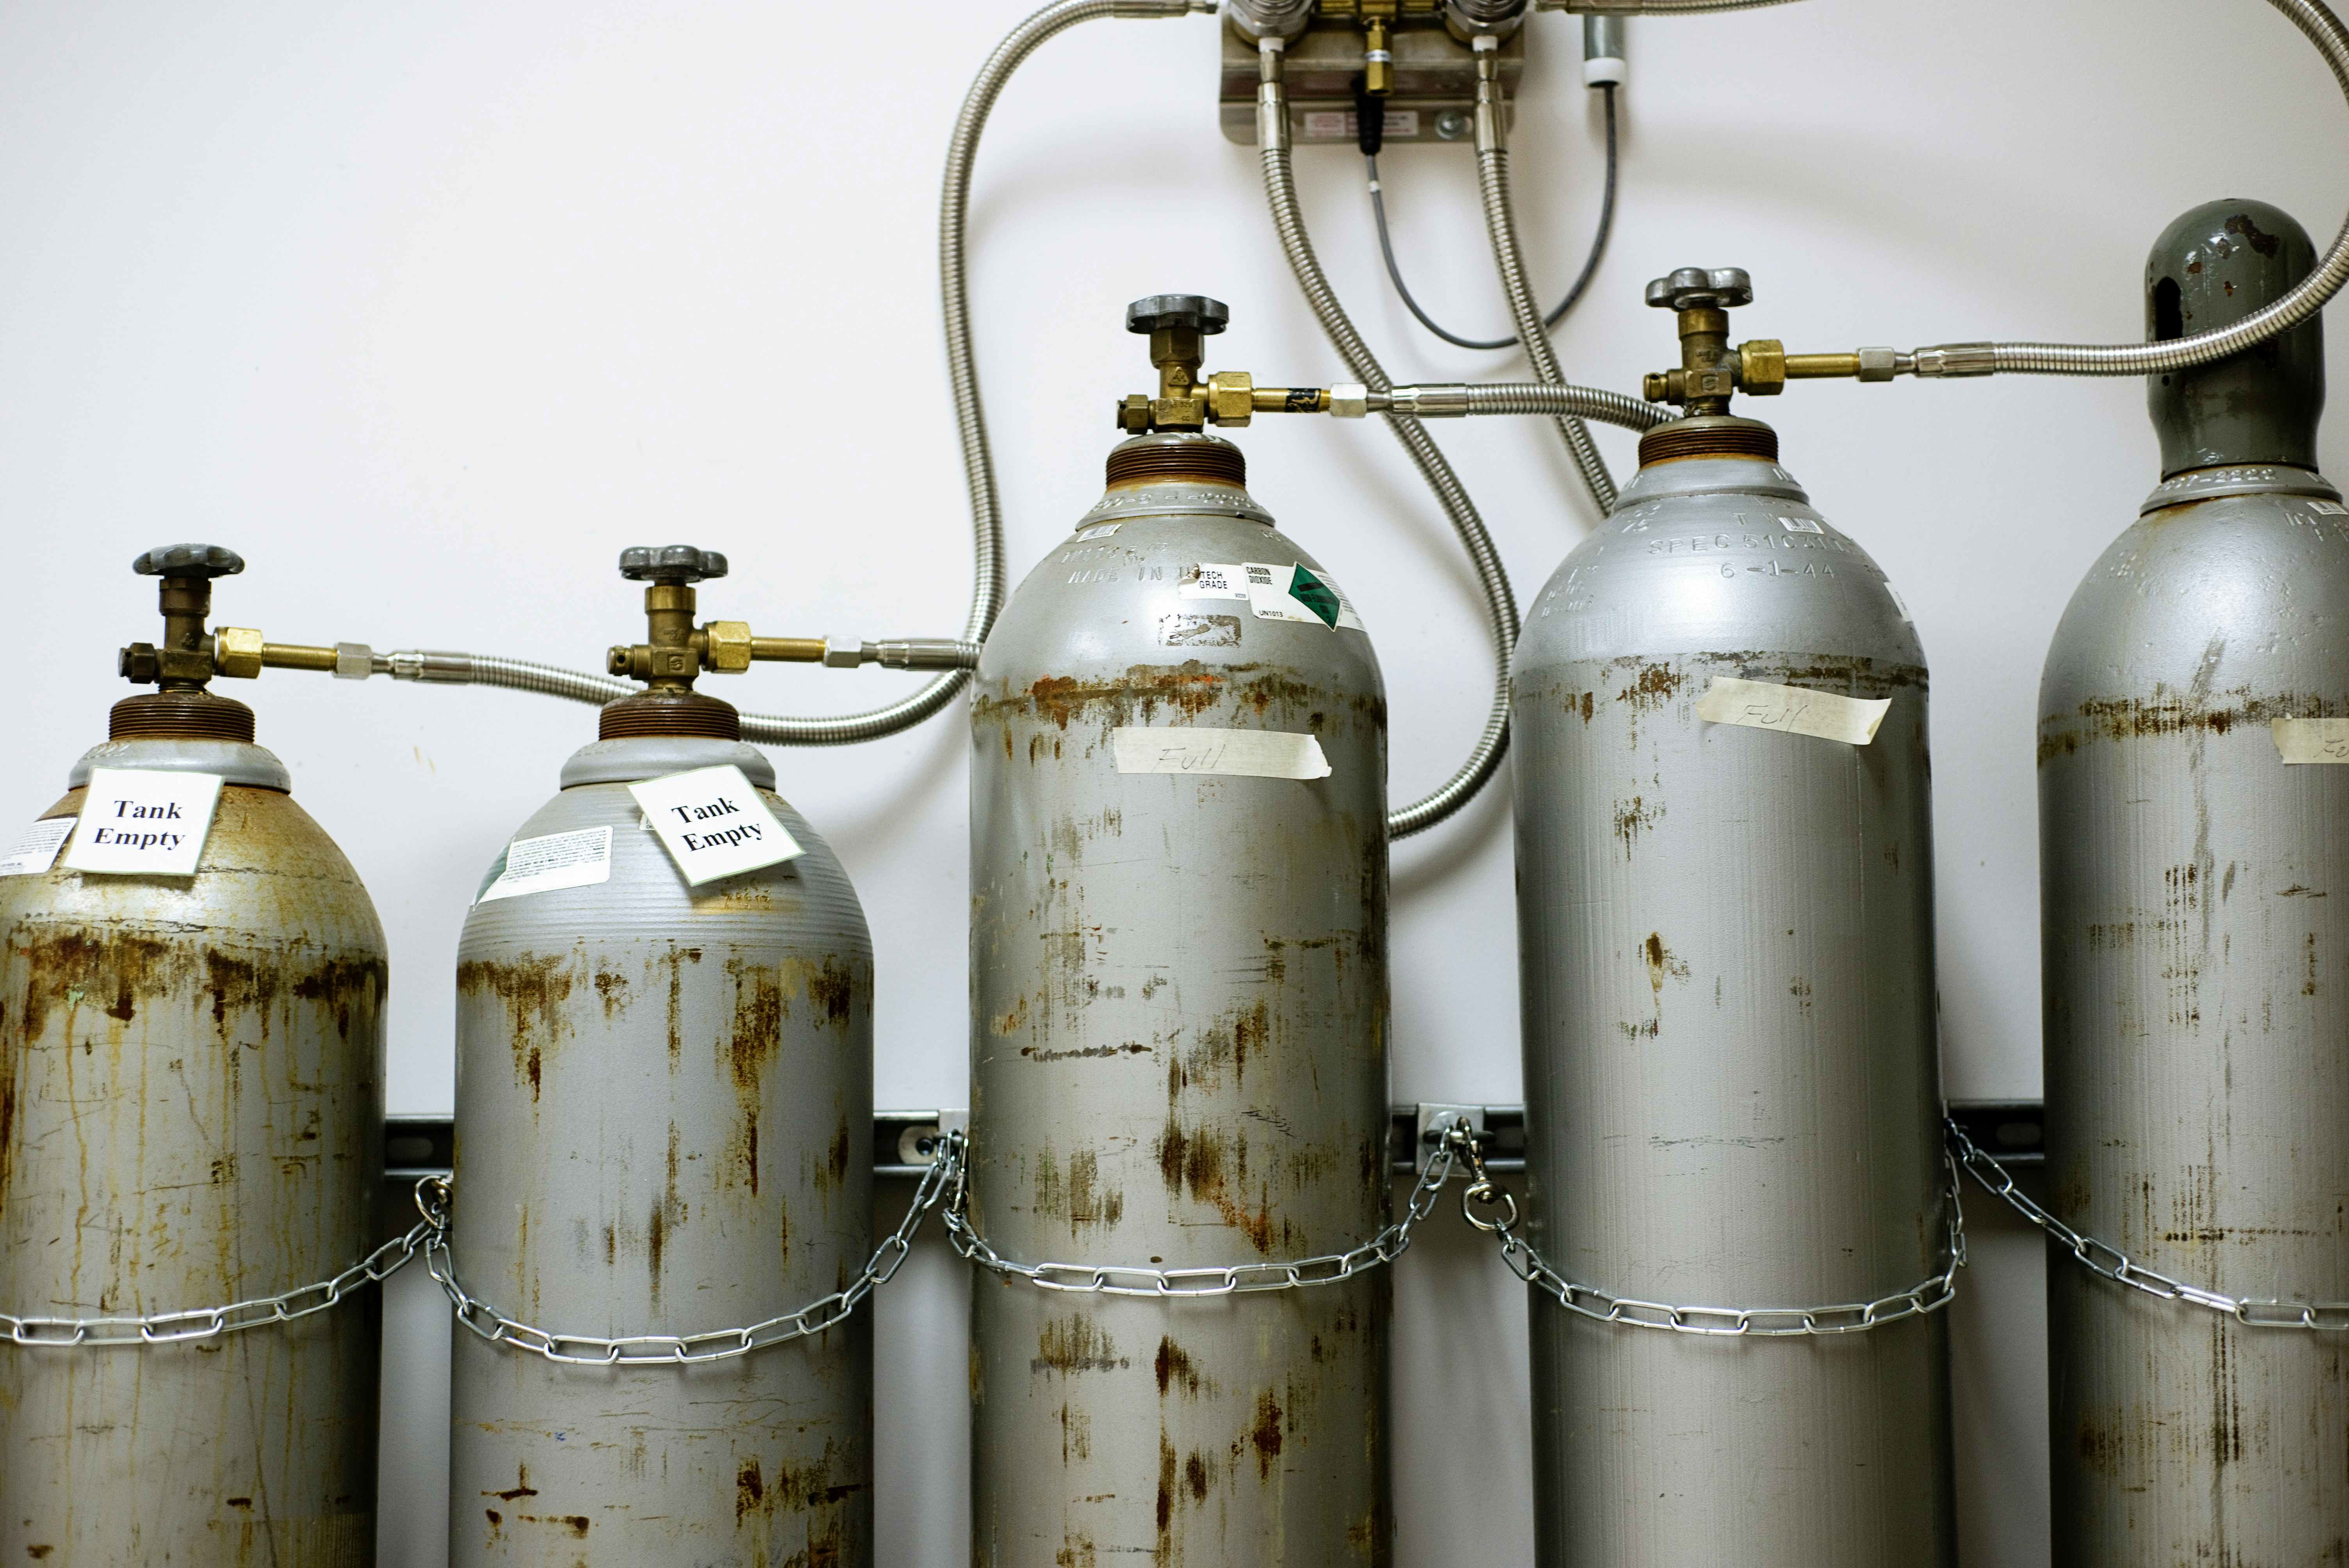 Tanks of CO2 with two of the tanks marked as empty.